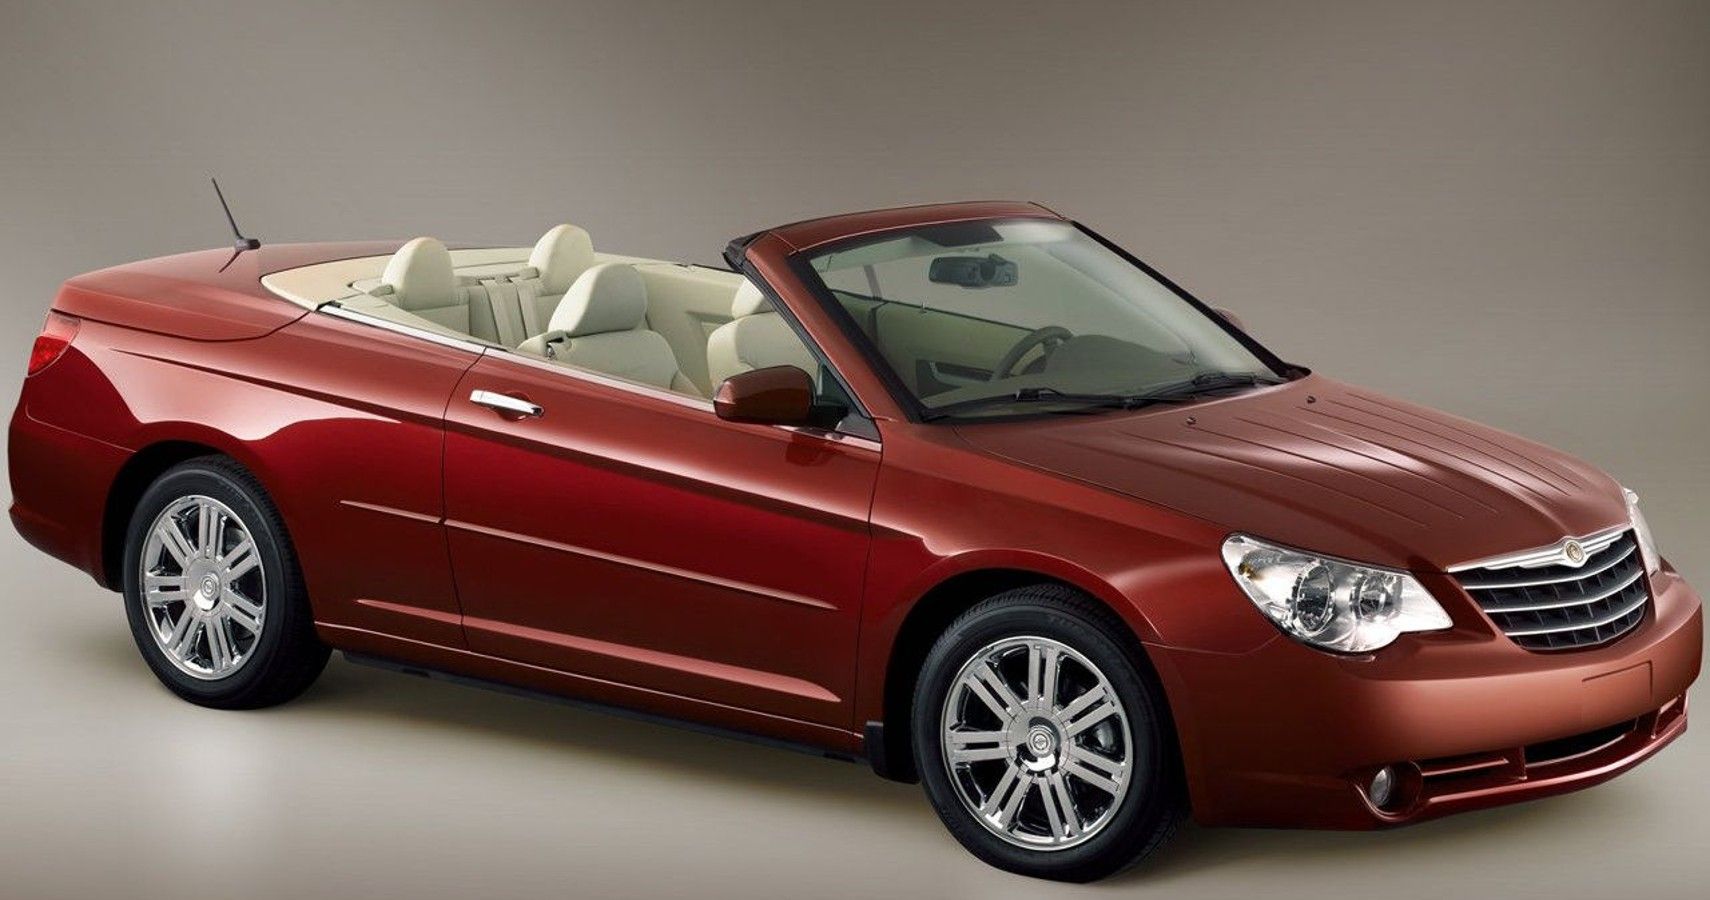 Here's Why We Won't Touch A Chrysler Sebring With A Ten-Foot Pole